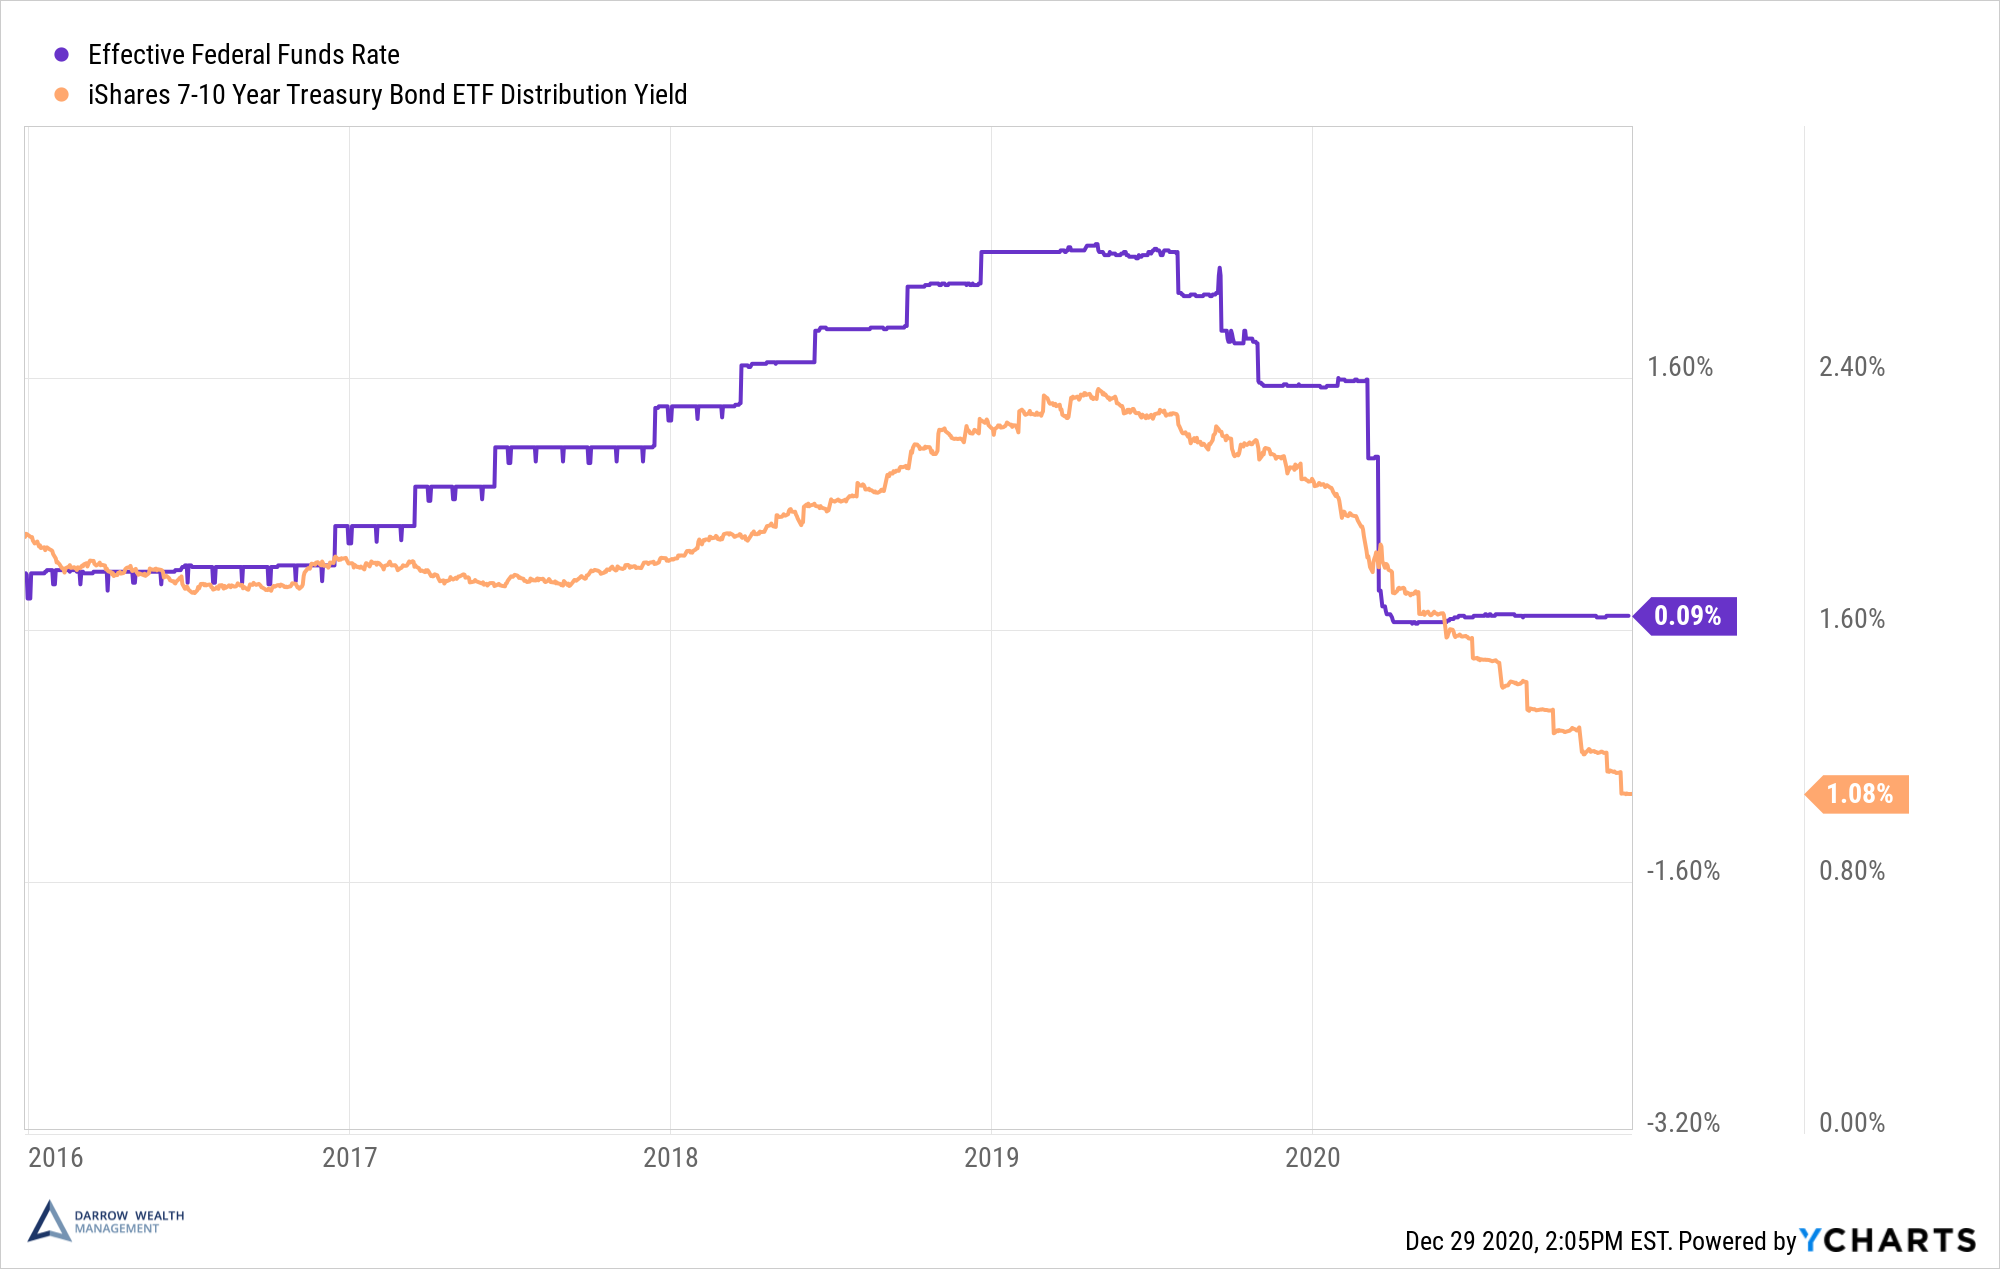 How Do Interest Rates Affect Bonds? Relationship Between Rates, Bond Prices and Yields